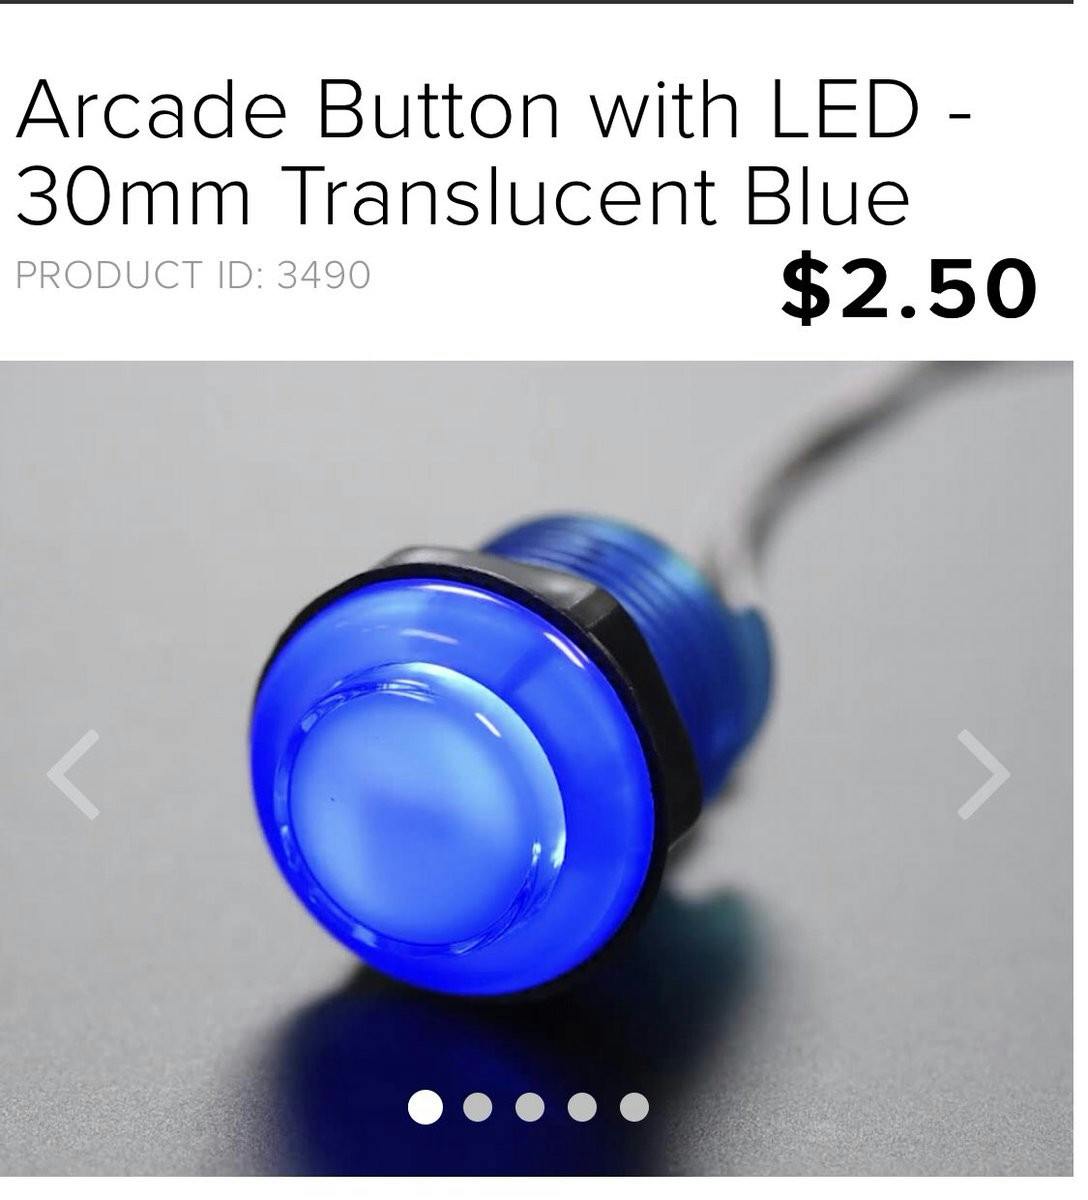 @adafruit Arcade Button with LED - 30mm Translucent Blue